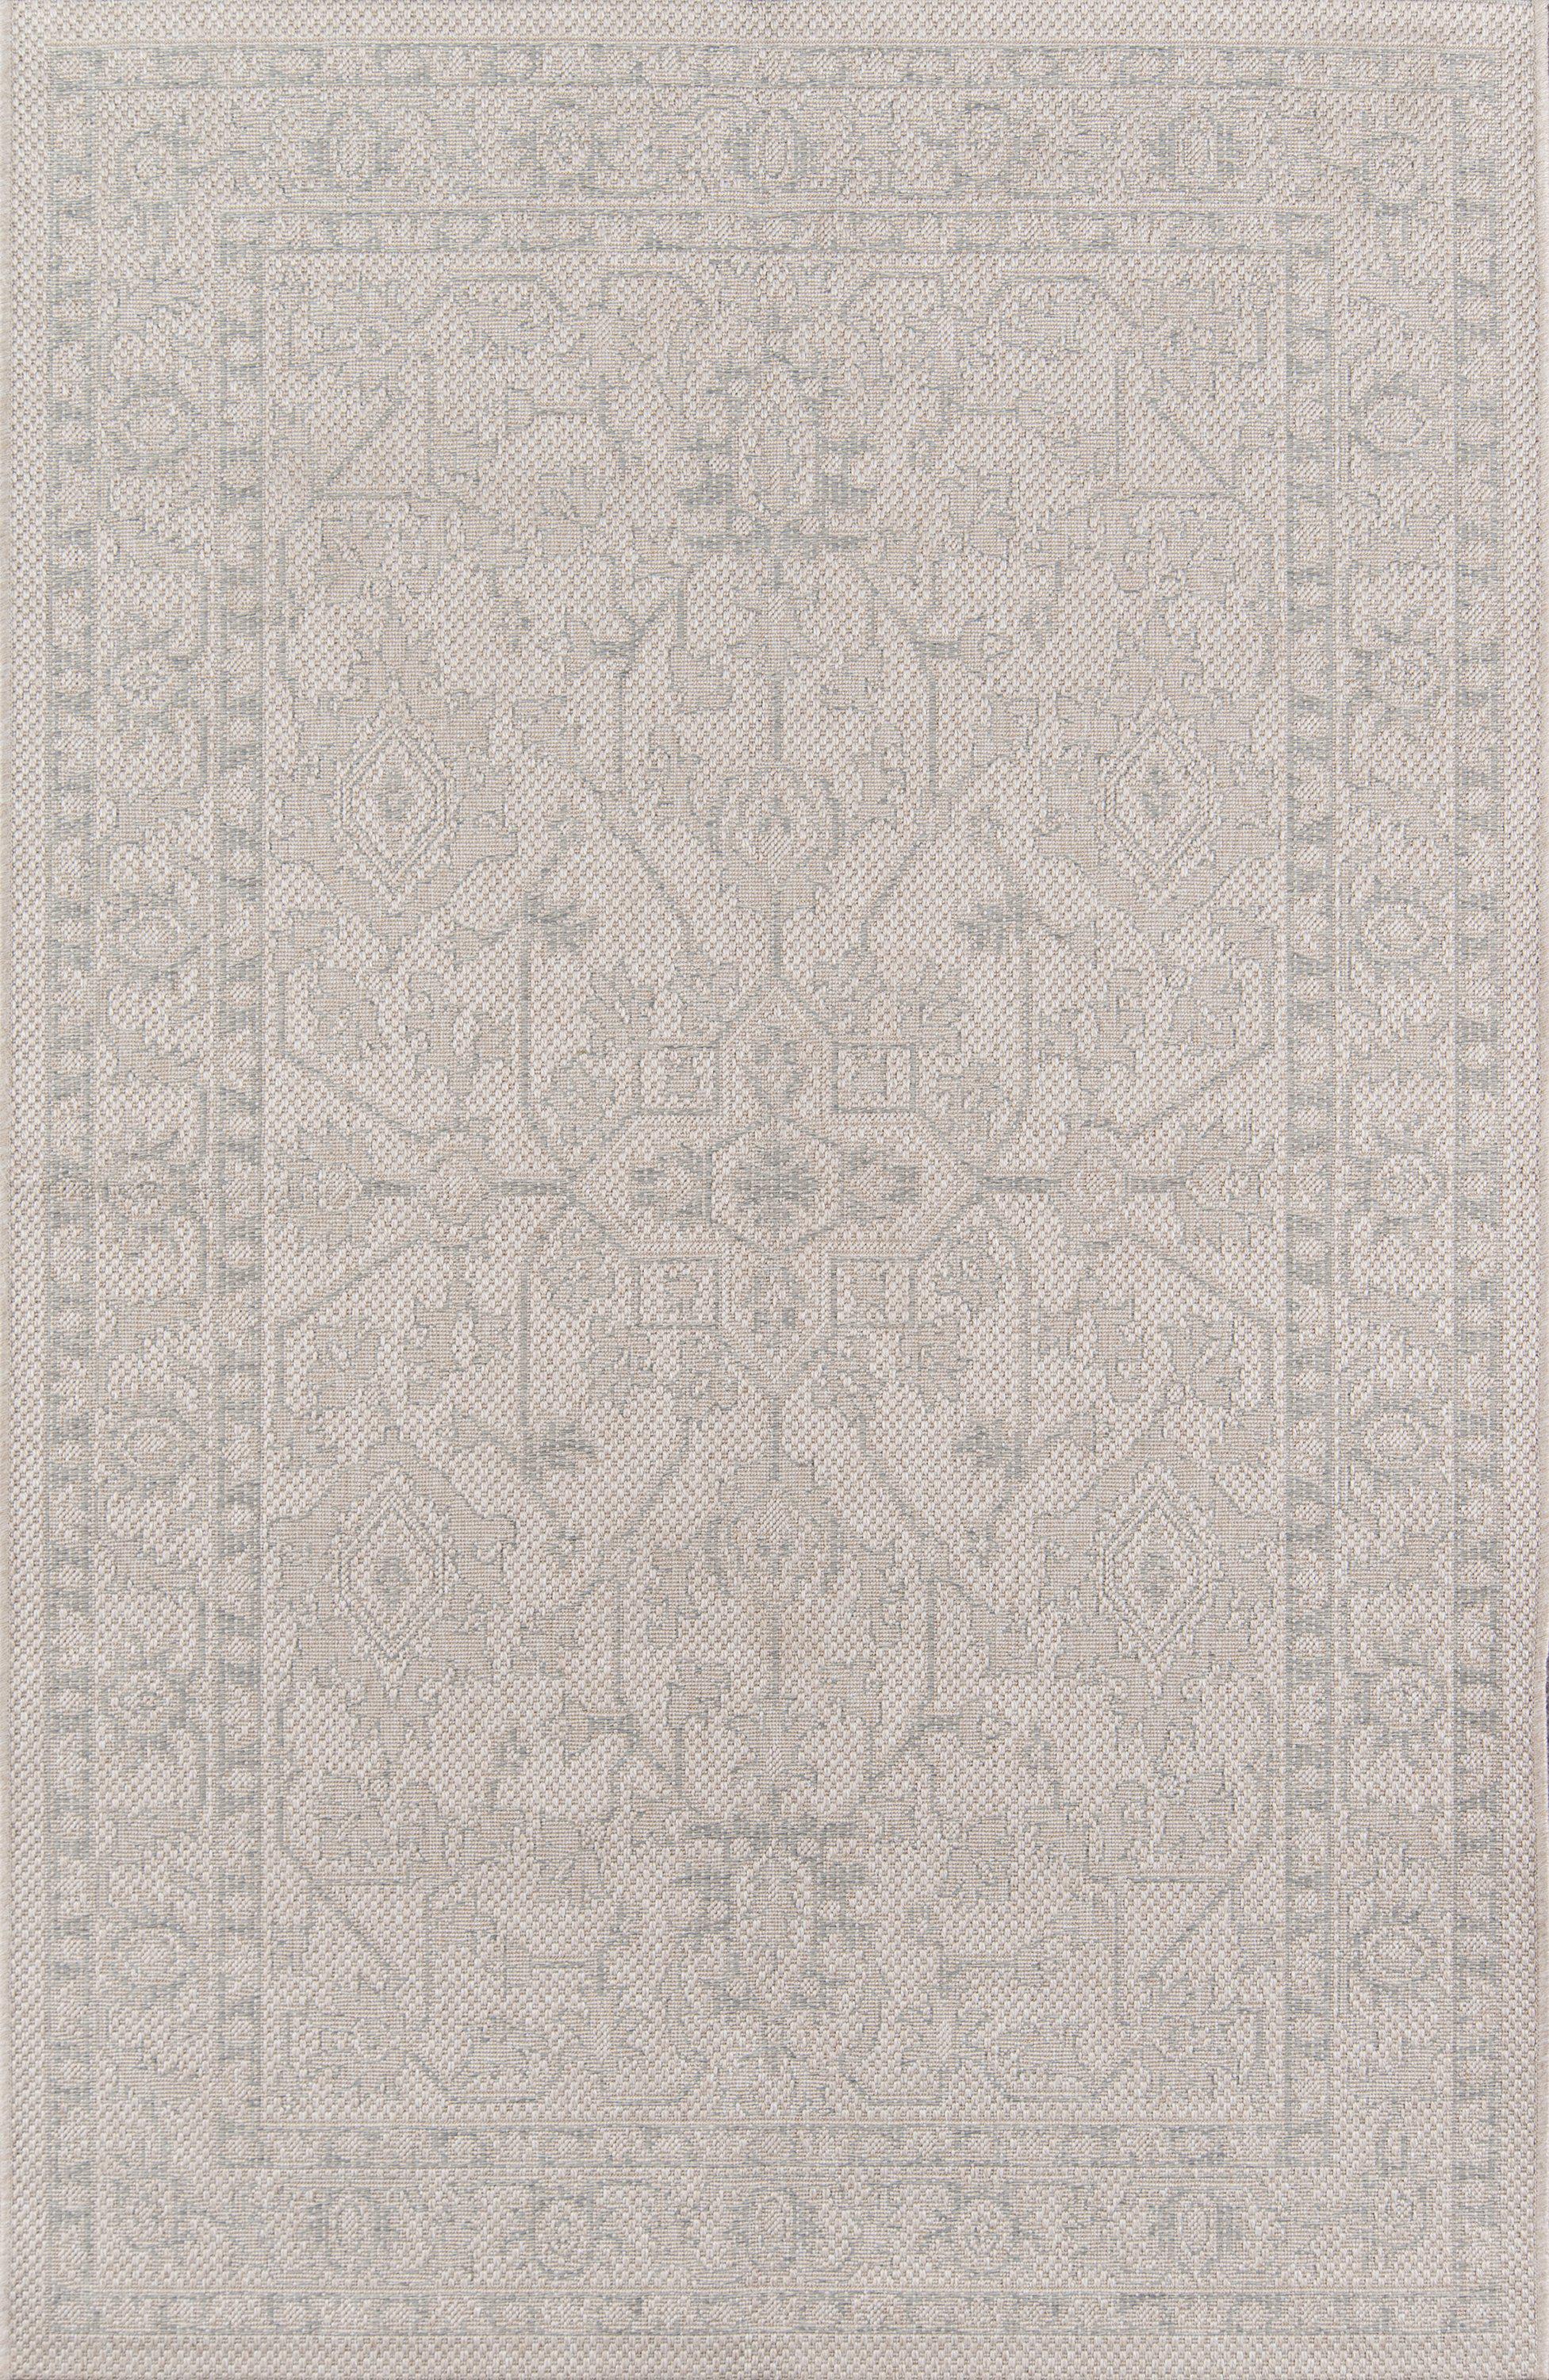 Erin Gates Downeast DOW-3 Boothbay Grey Area Rug ( 7'10" X 10'10" )